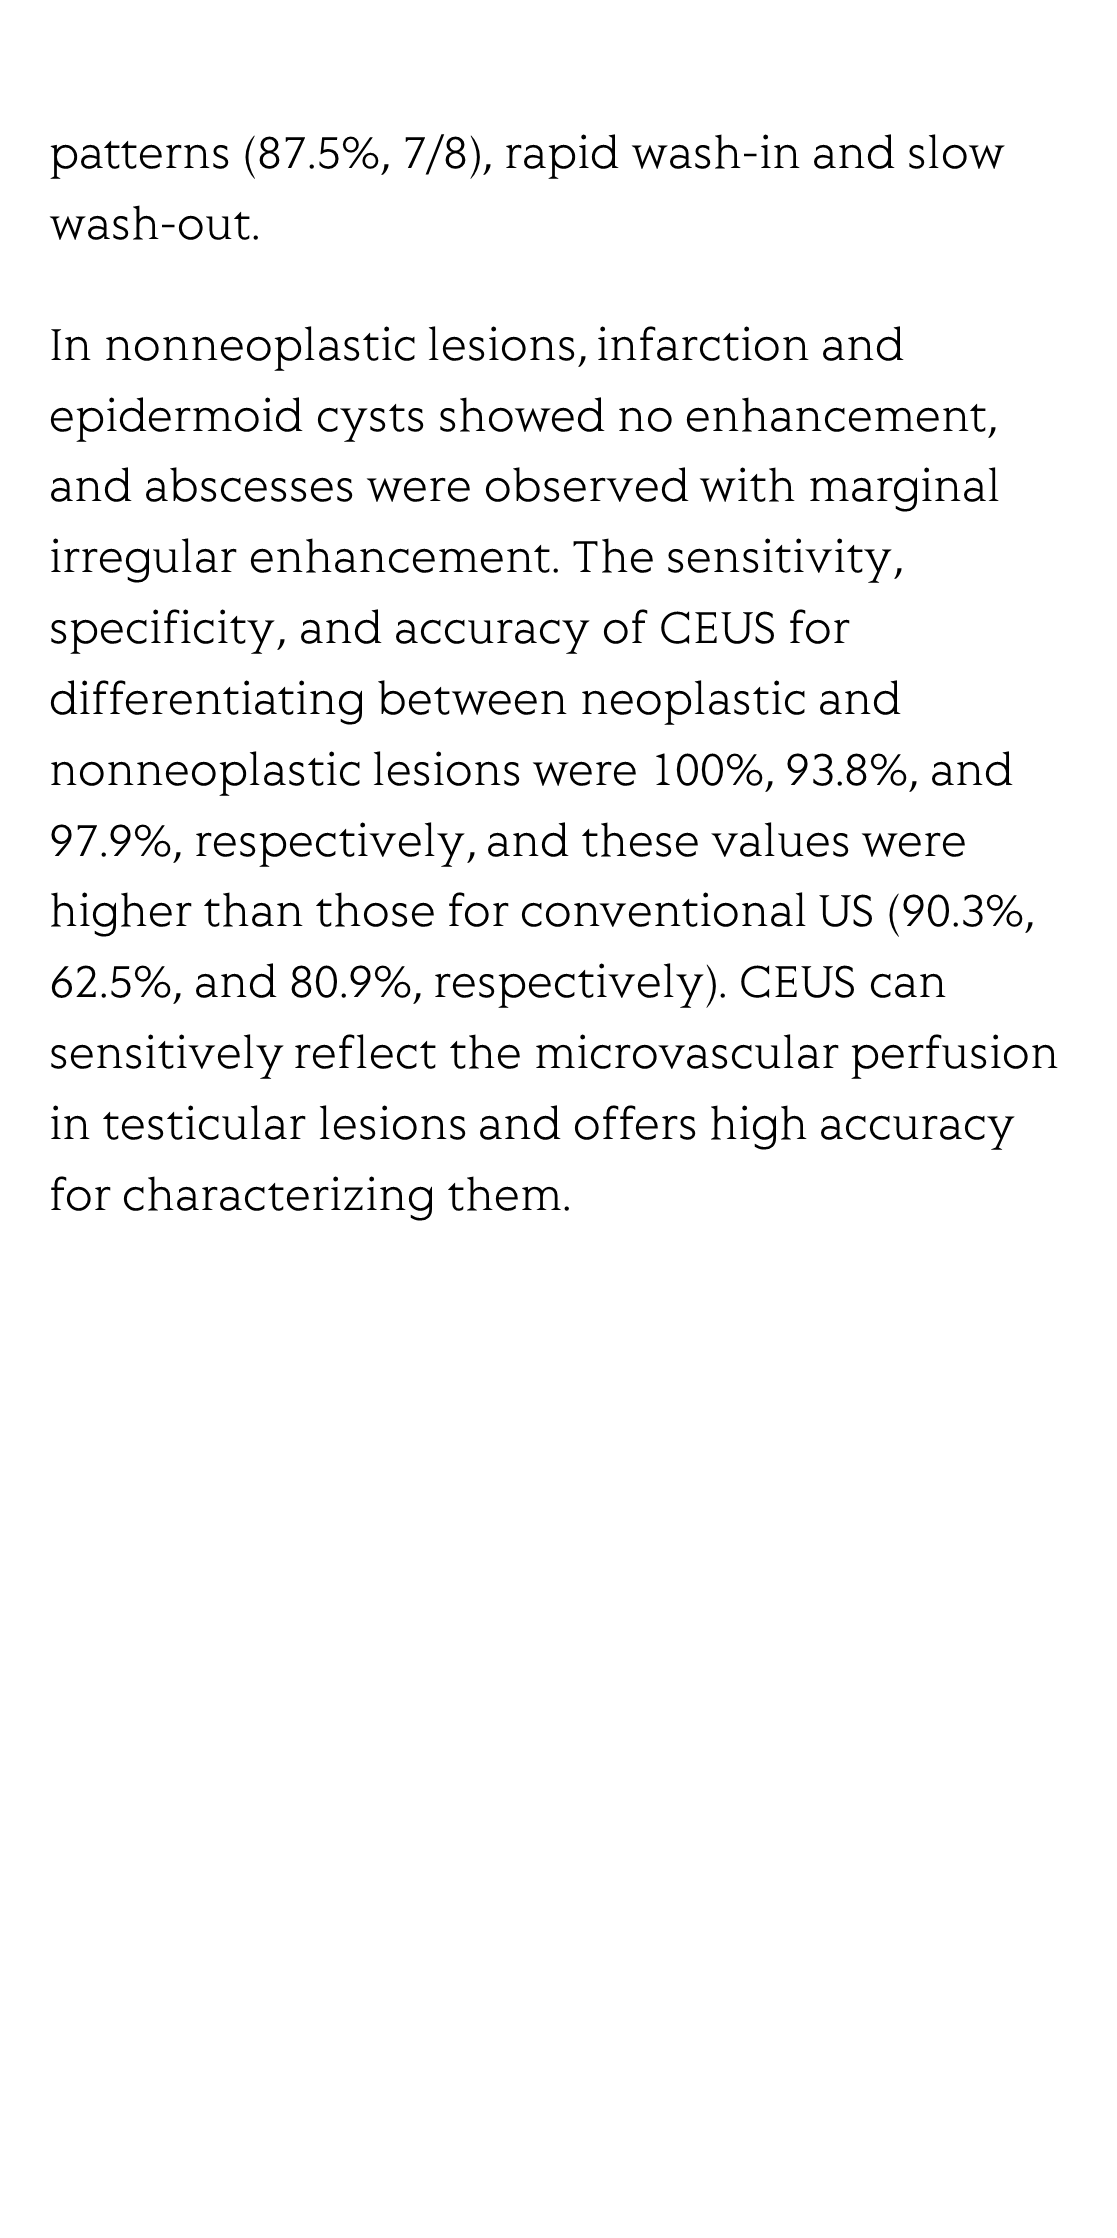 Contrast-enhanced ultrasound as a valuable imaging modality for characterizing testicular lesions_3